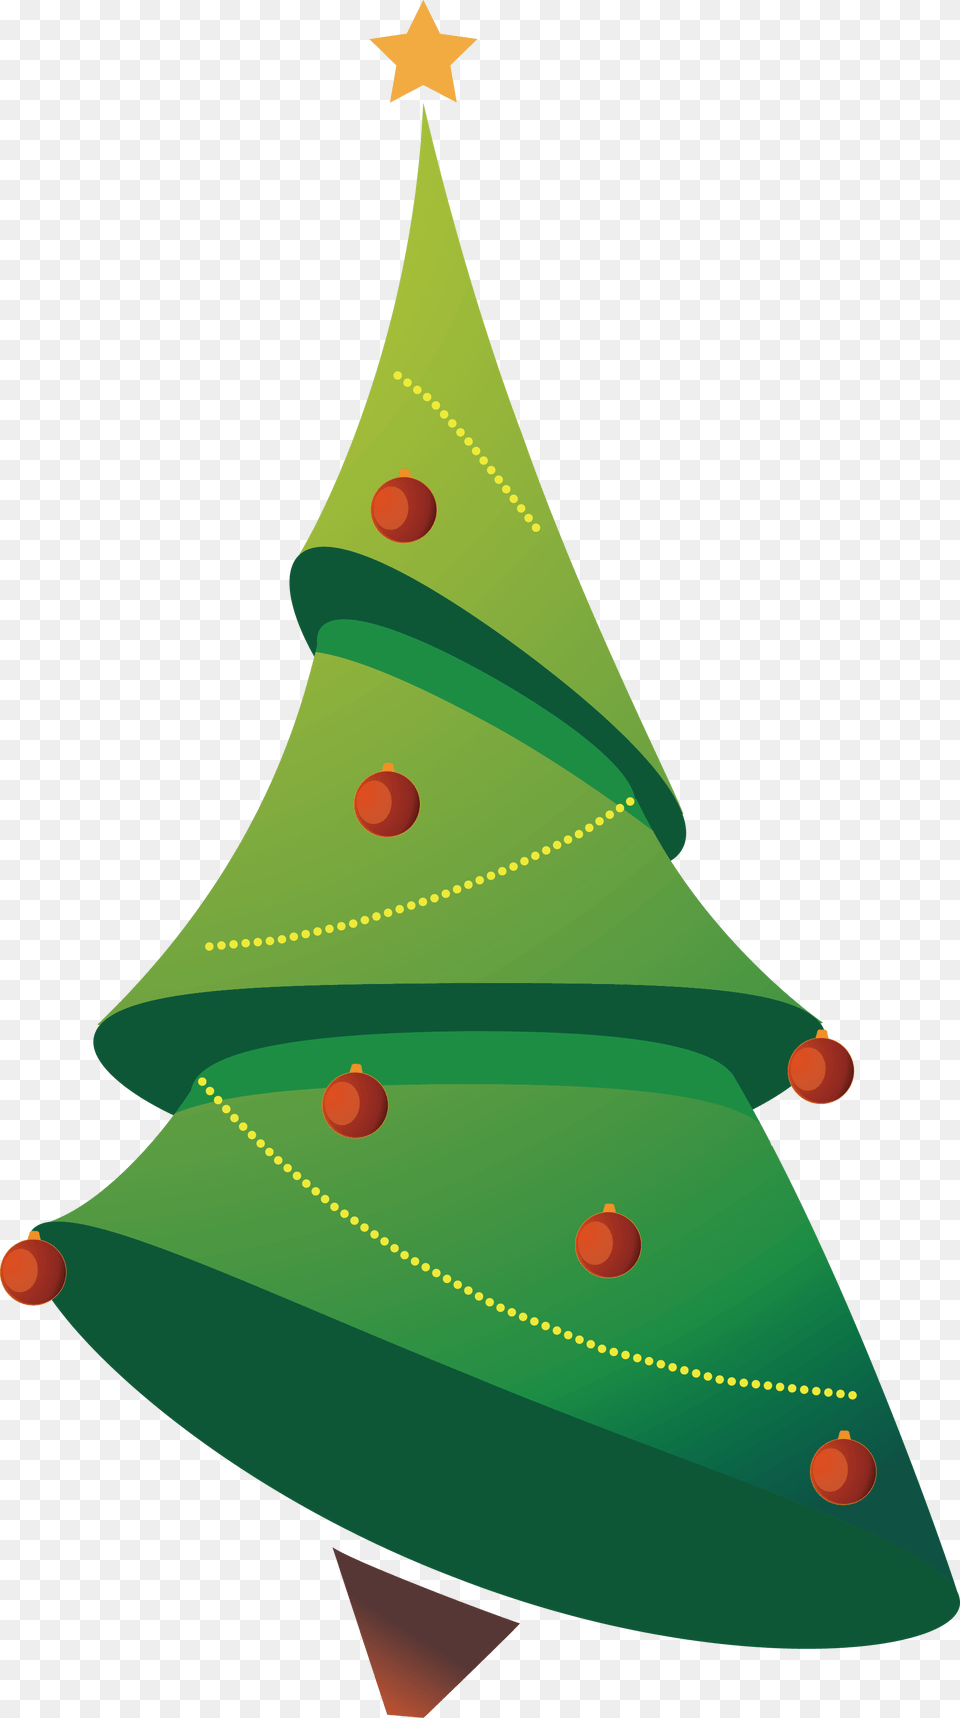 Remarkable Christmas Tree Vector Ideas Remarkablestmas Christmas Tree Vector, Christmas Decorations, Festival, Christmas Tree Free Transparent Png